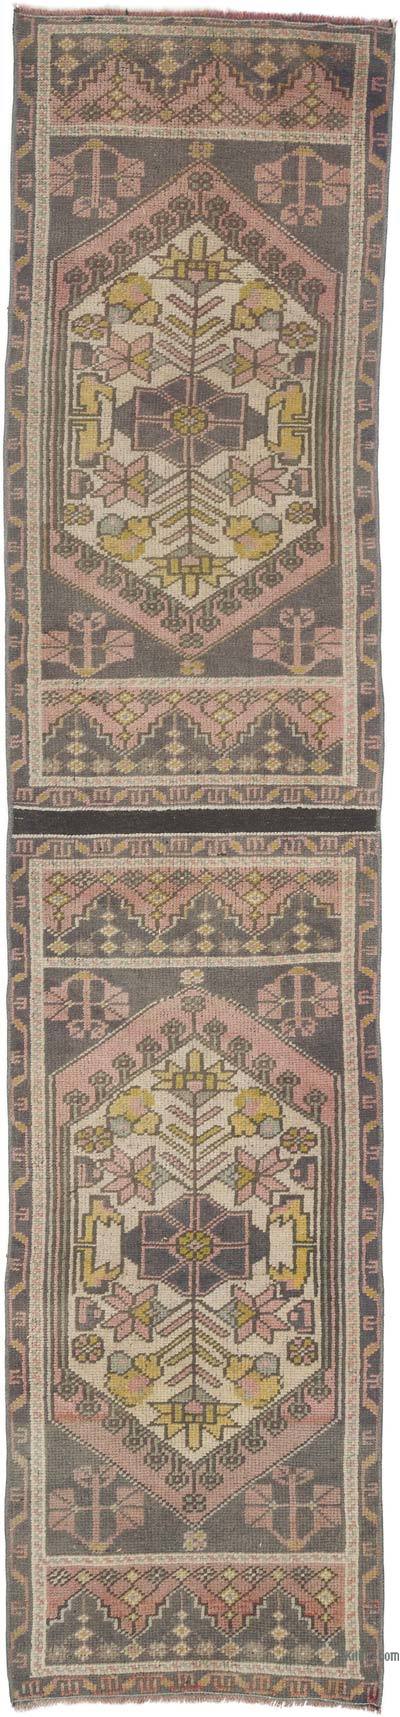 Vintage Turkish Hand-Knotted Runner - 1' 9" x 7' 11" (21 in. x 95 in.)